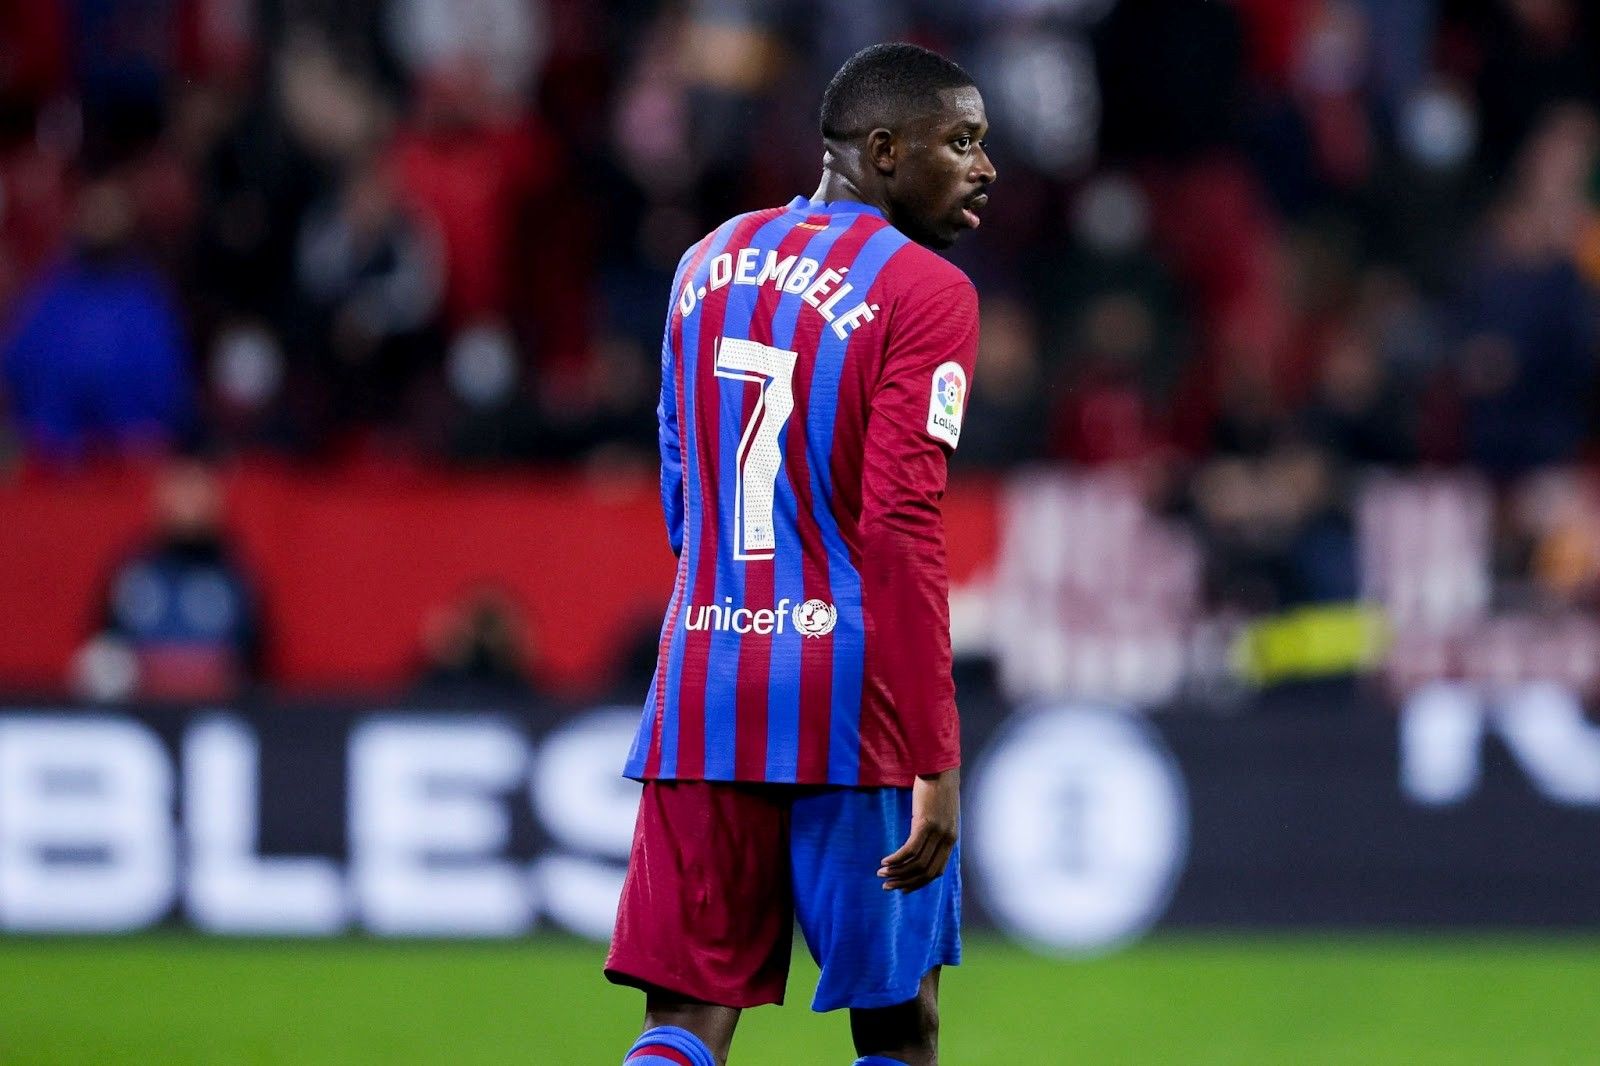 It seems obvious that the player does not want to continue at Barca: Alemany on Dembele